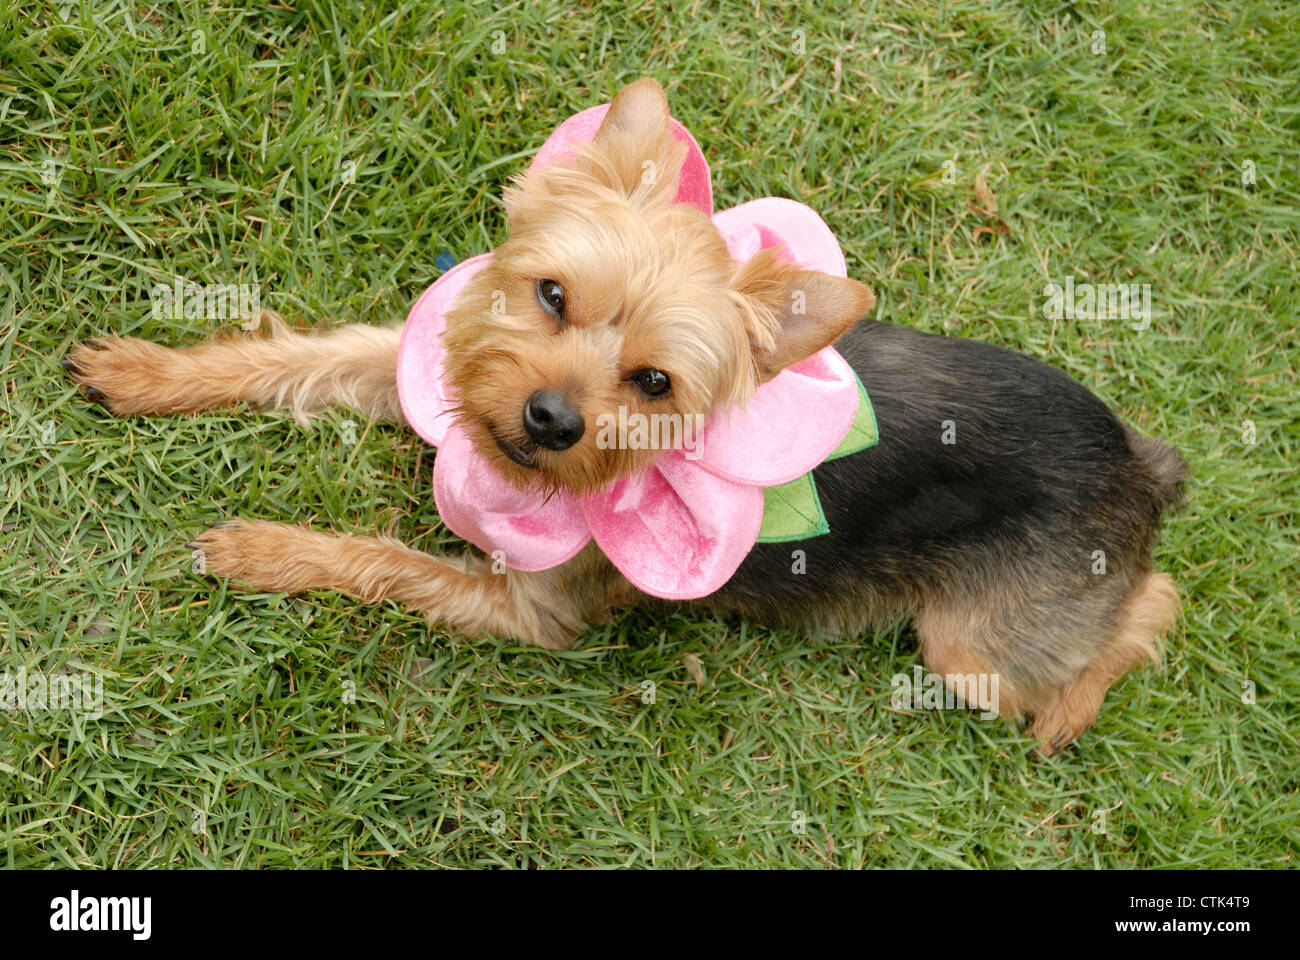 Pet Yorkshire Terrier dog in the grass, wearing a flower petal collar. Stock Photo